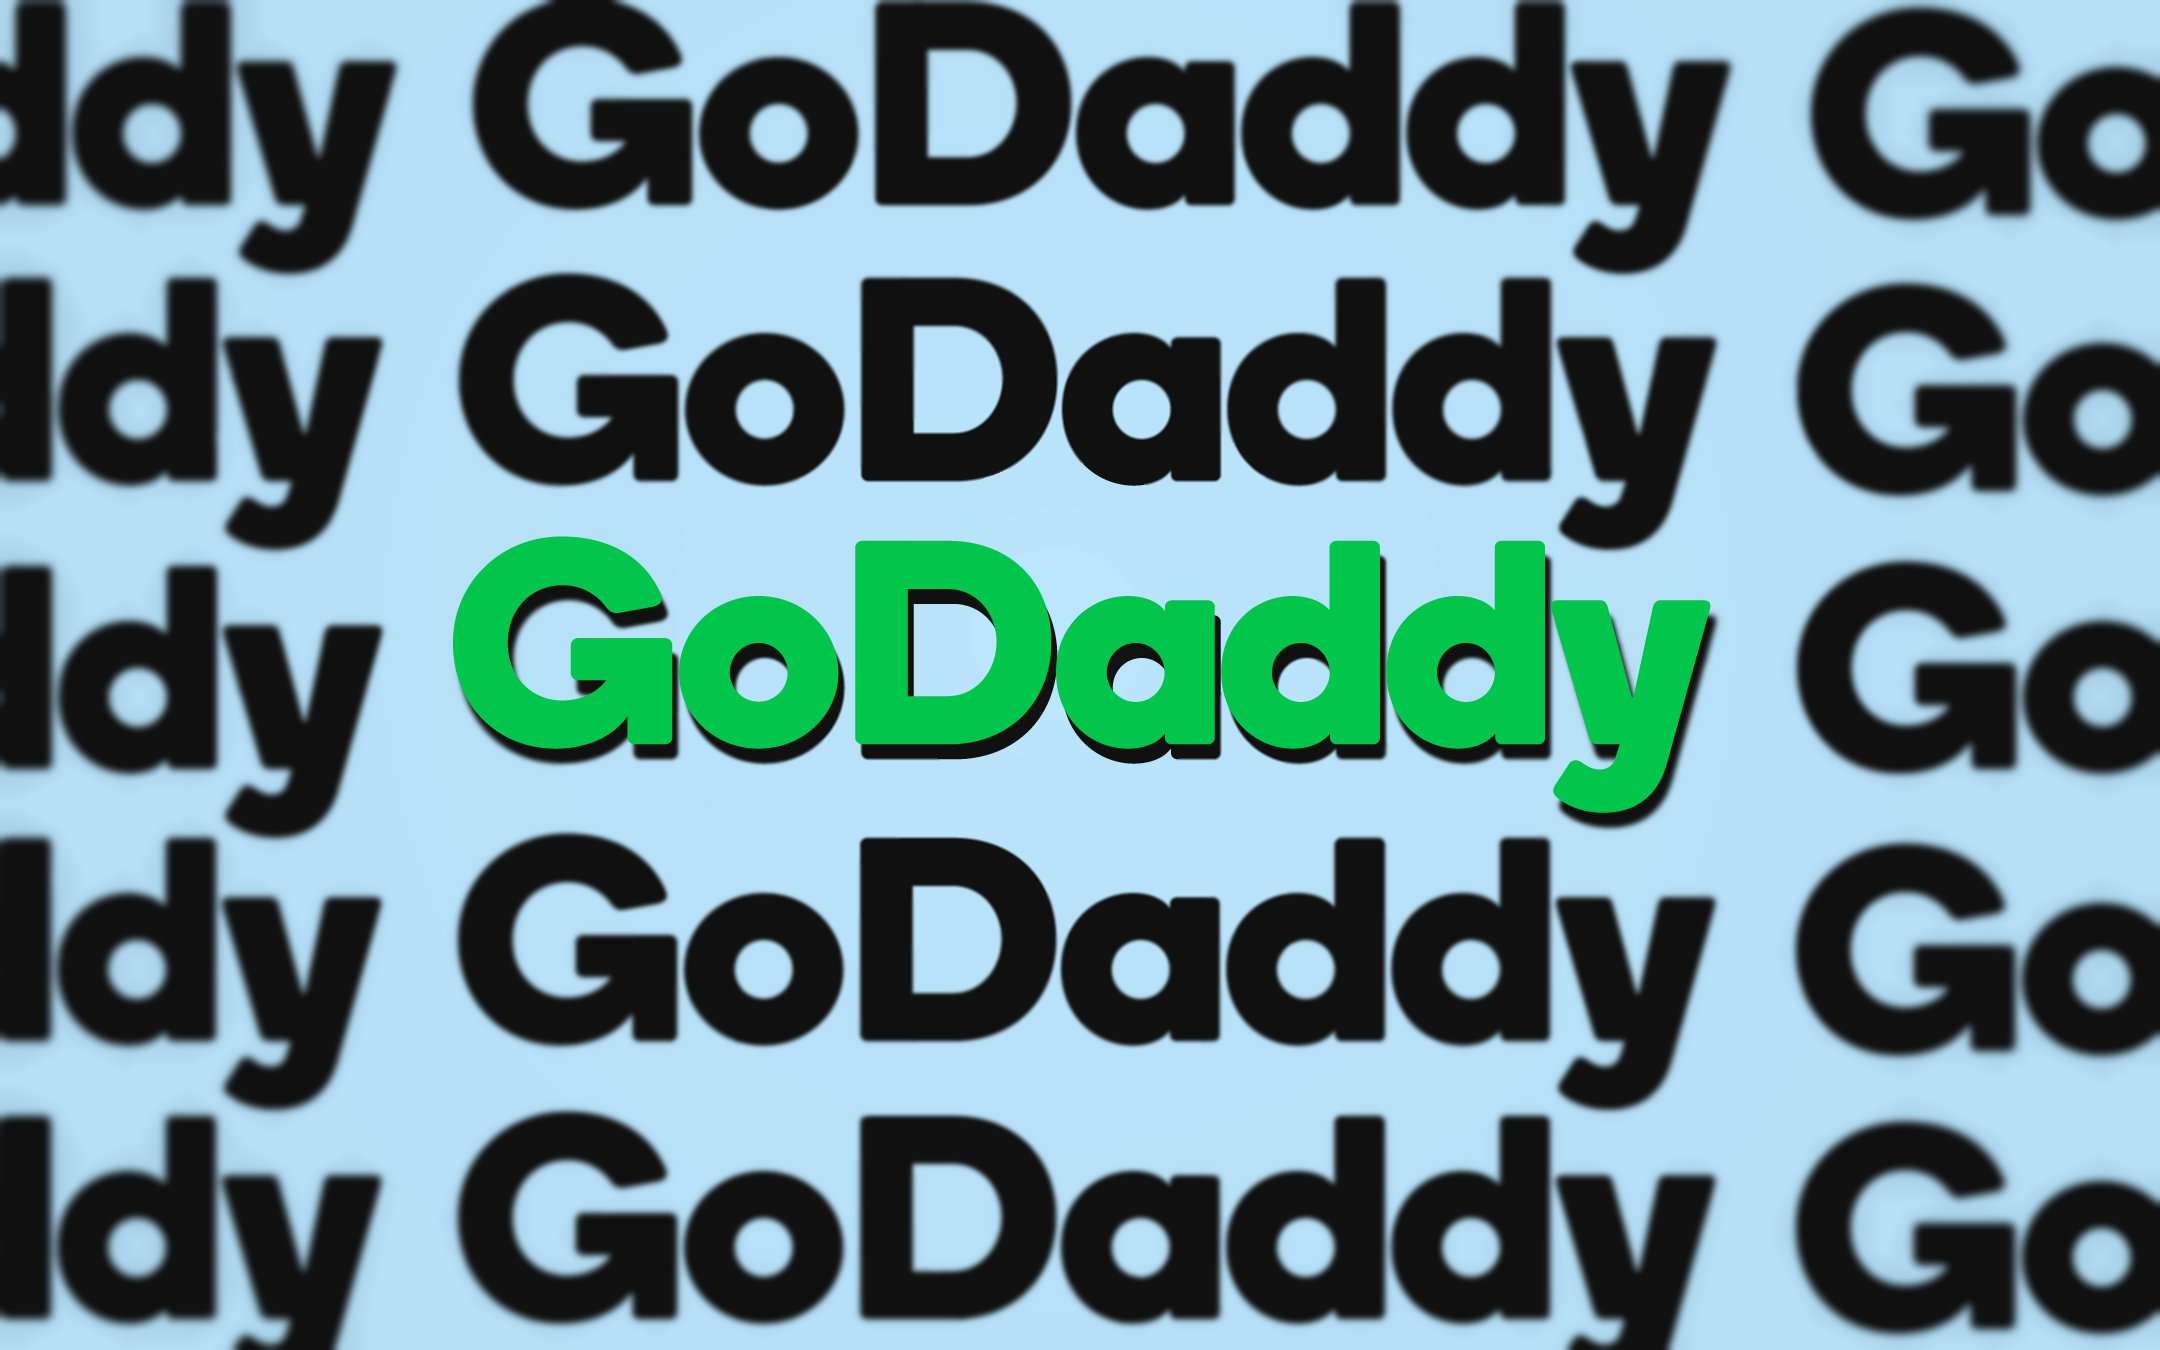 Are GoDaddy technicians the victim of a vishing attack?